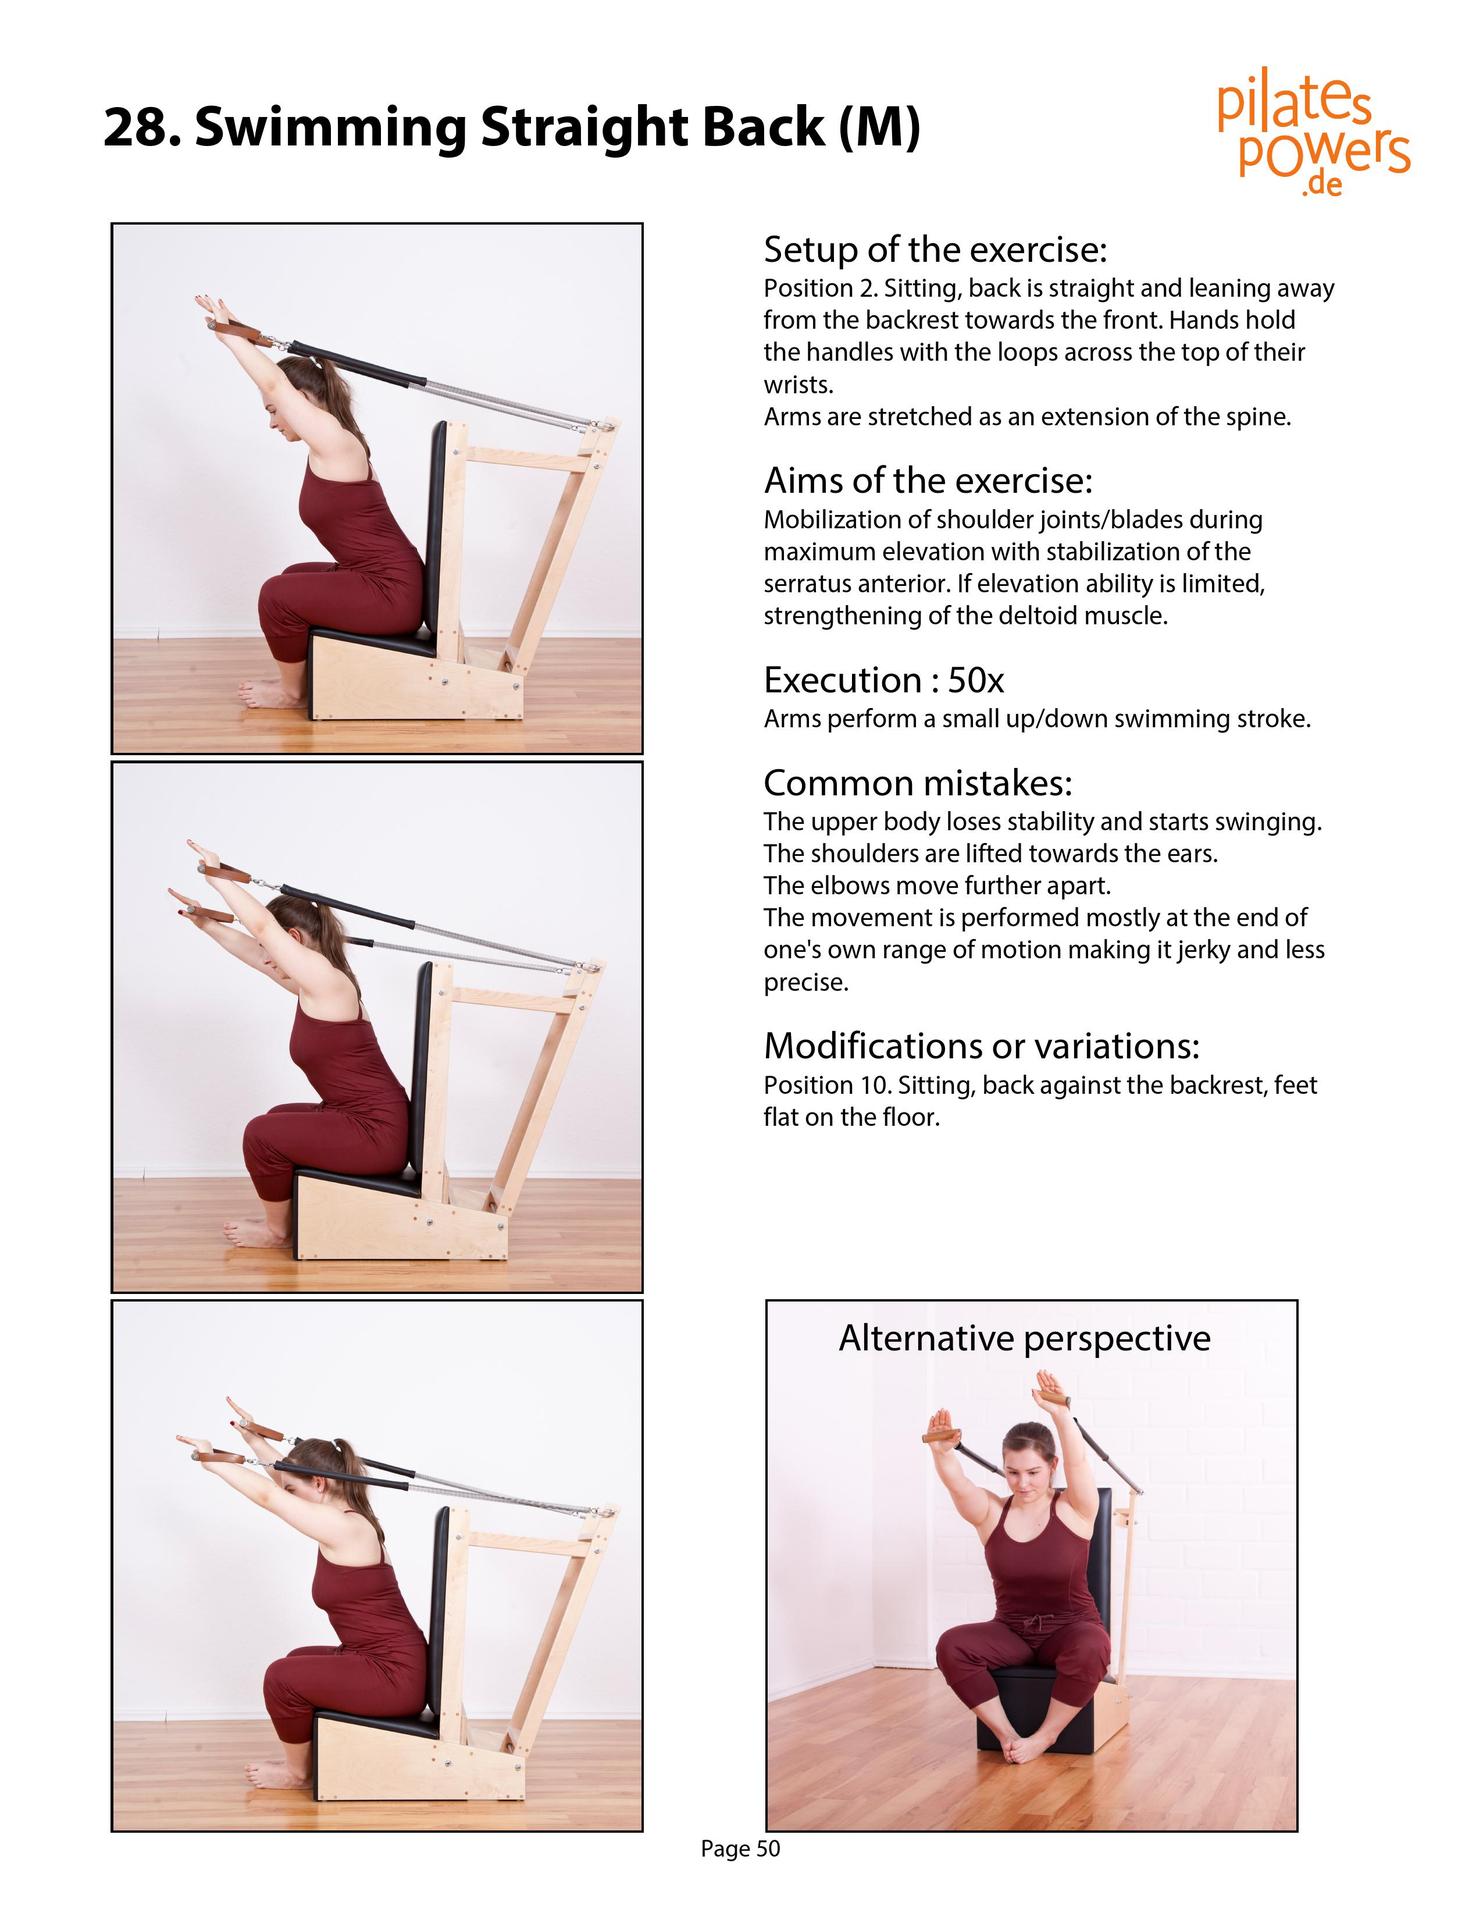 The Pilates Arm Chair The 42 most effective exercises - photo 50